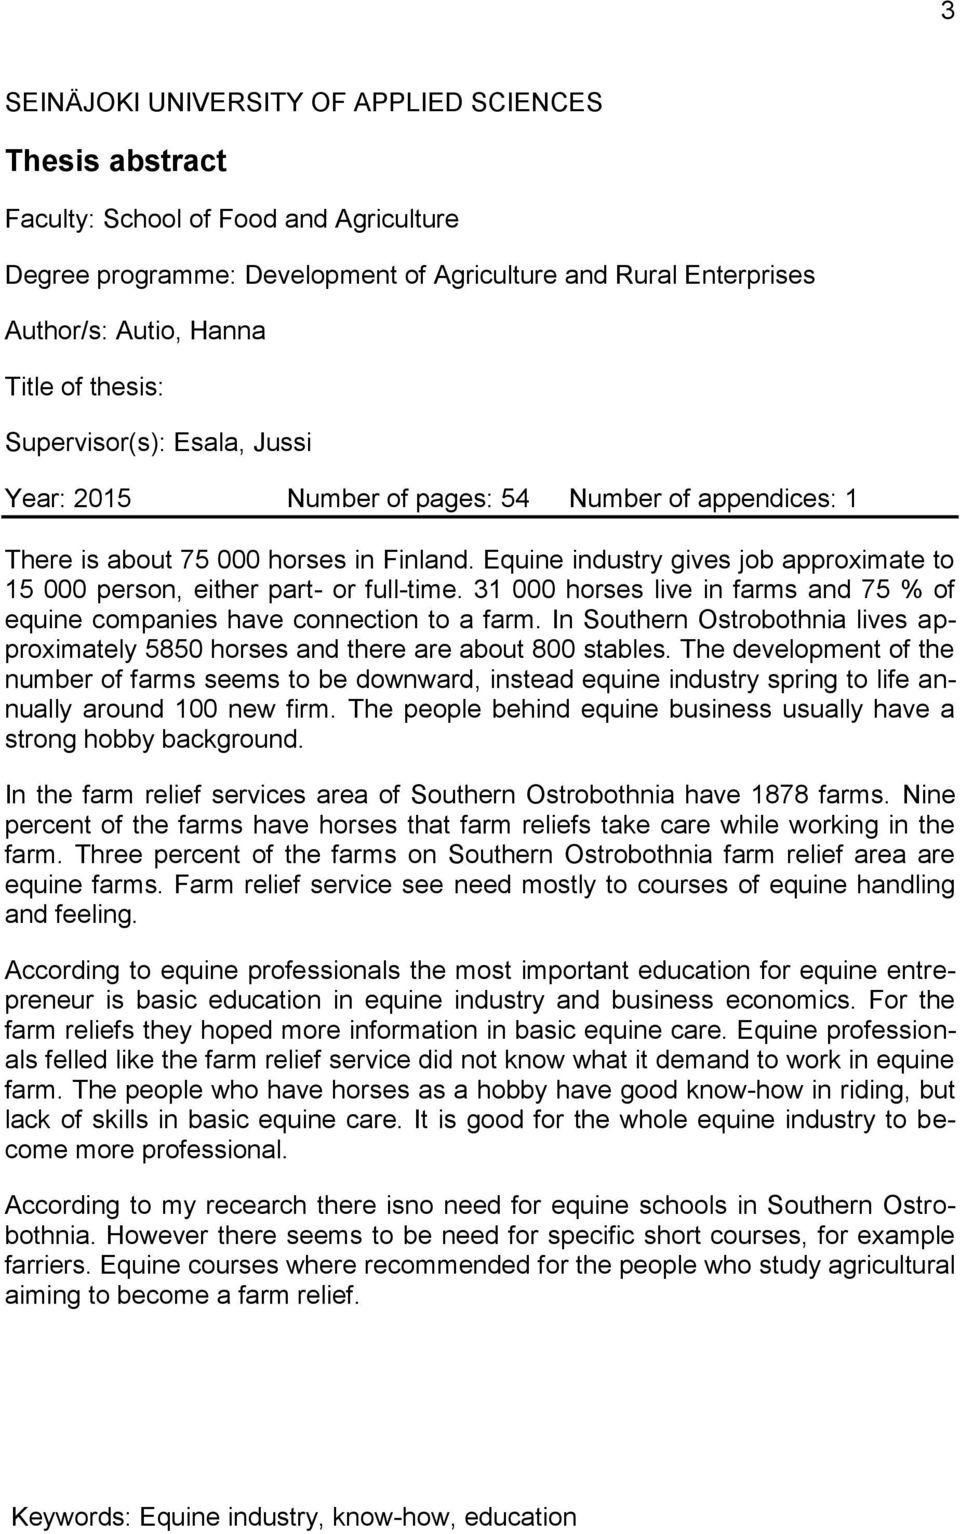 Equine industry gives job approximate to 15 000 person, either part- or full-time. 31 000 horses live in farms and 75 % of equine companies have connection to a farm.